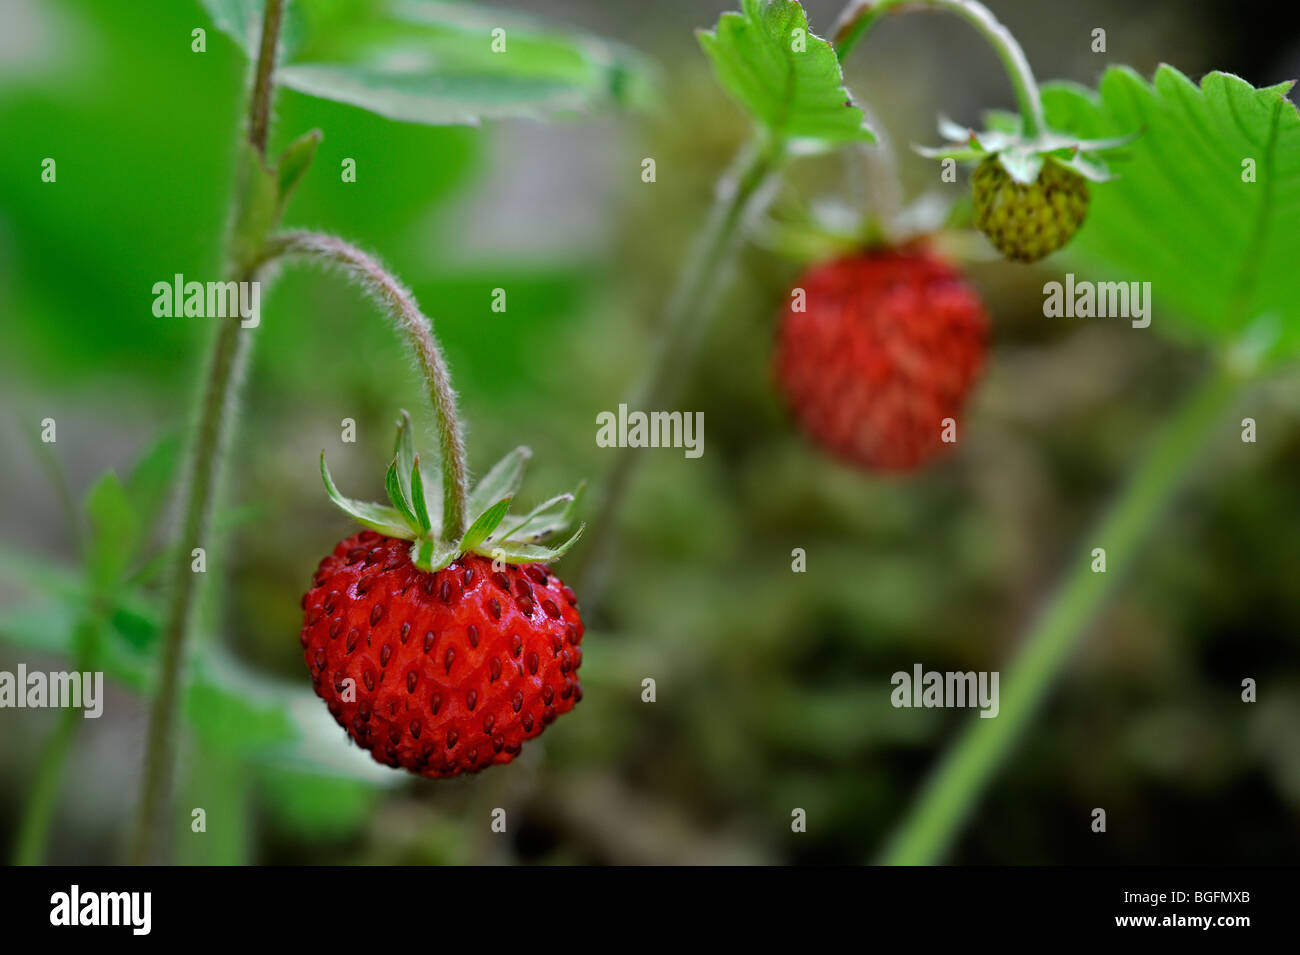 Woodland strawberry / Wild strawberries (Fragaria vesca) close up showing red fruit Stock Photo